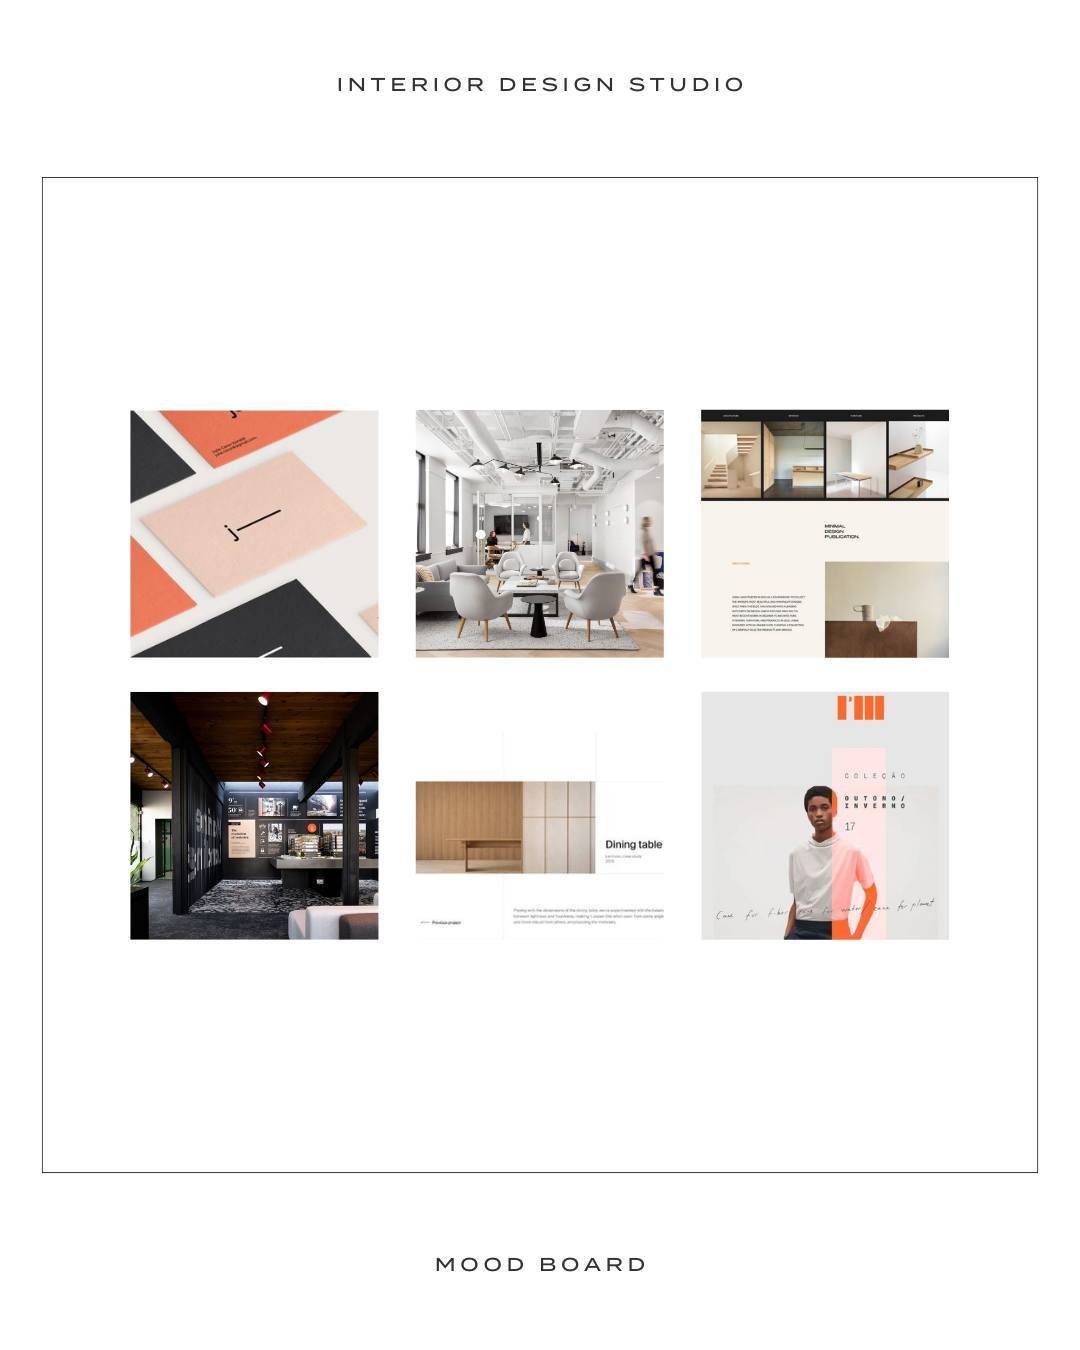 Established, Bold &amp; High Quality // This mood board, colour palette and typography is for a Commercial Interior Design Studio website that we completed over several weeks.⁣
⁣
Vancouver&rsquo;s top interior design studio for commercial projects, E